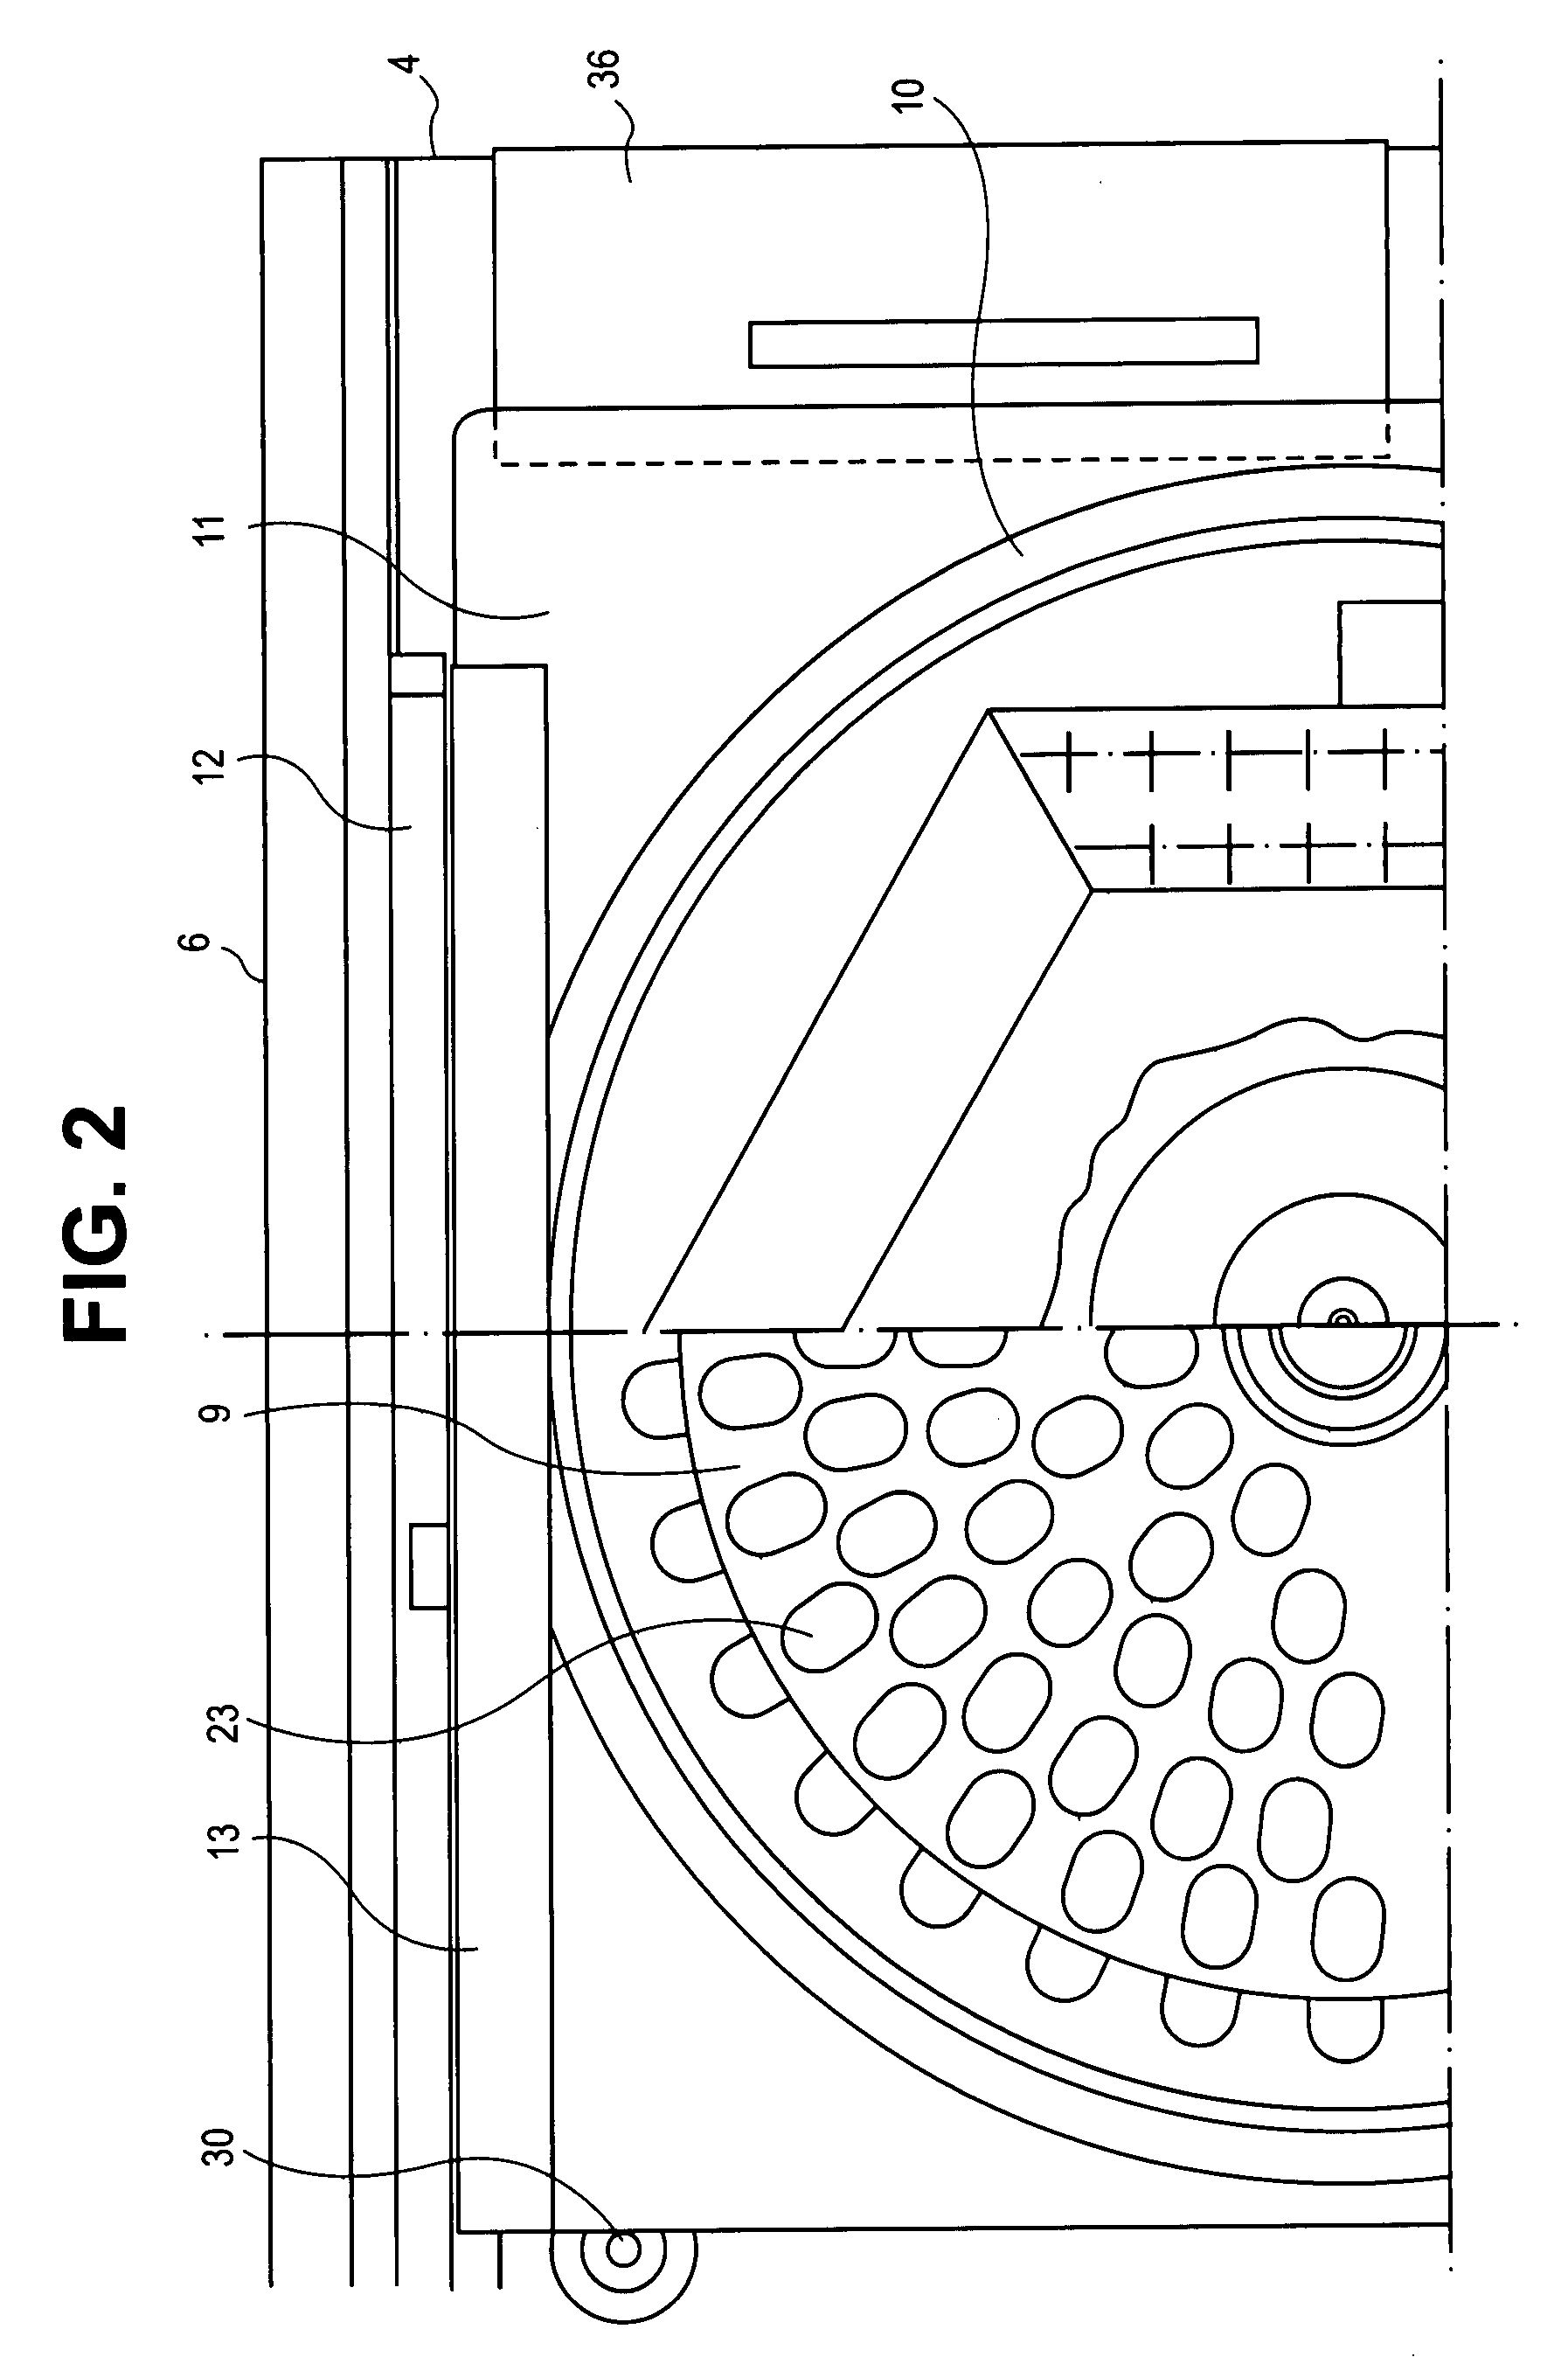 Method and software for detecting vacuum concentrator ends-of-runs